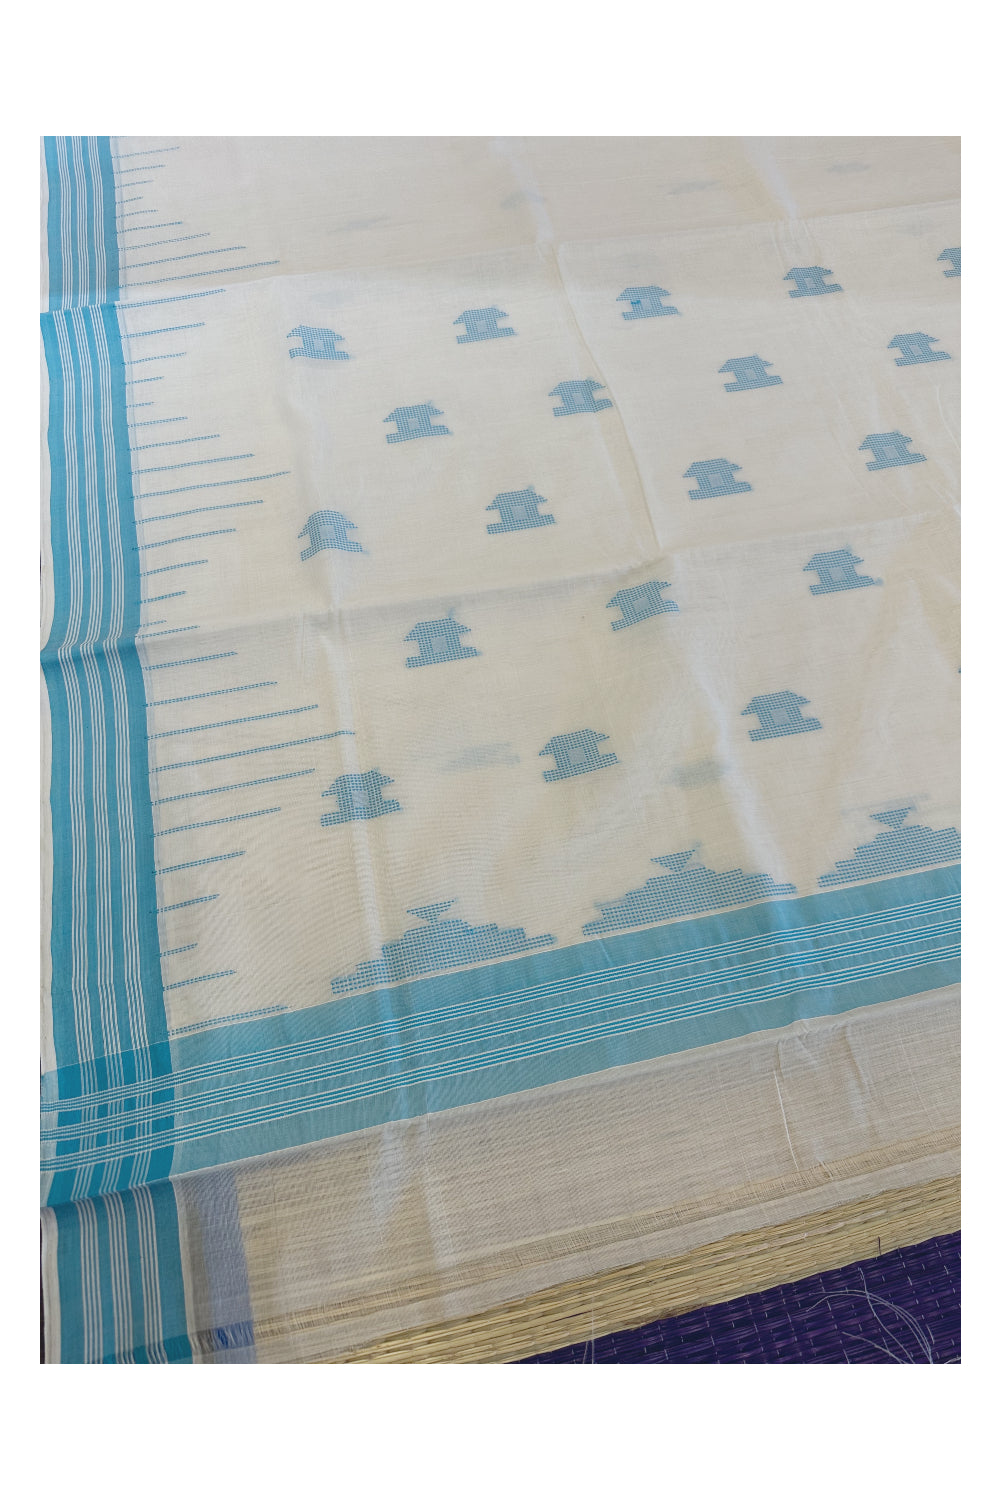 Southloom Kuthampully Handloom Onam 2023 Saree with Blue Border and Butta Works